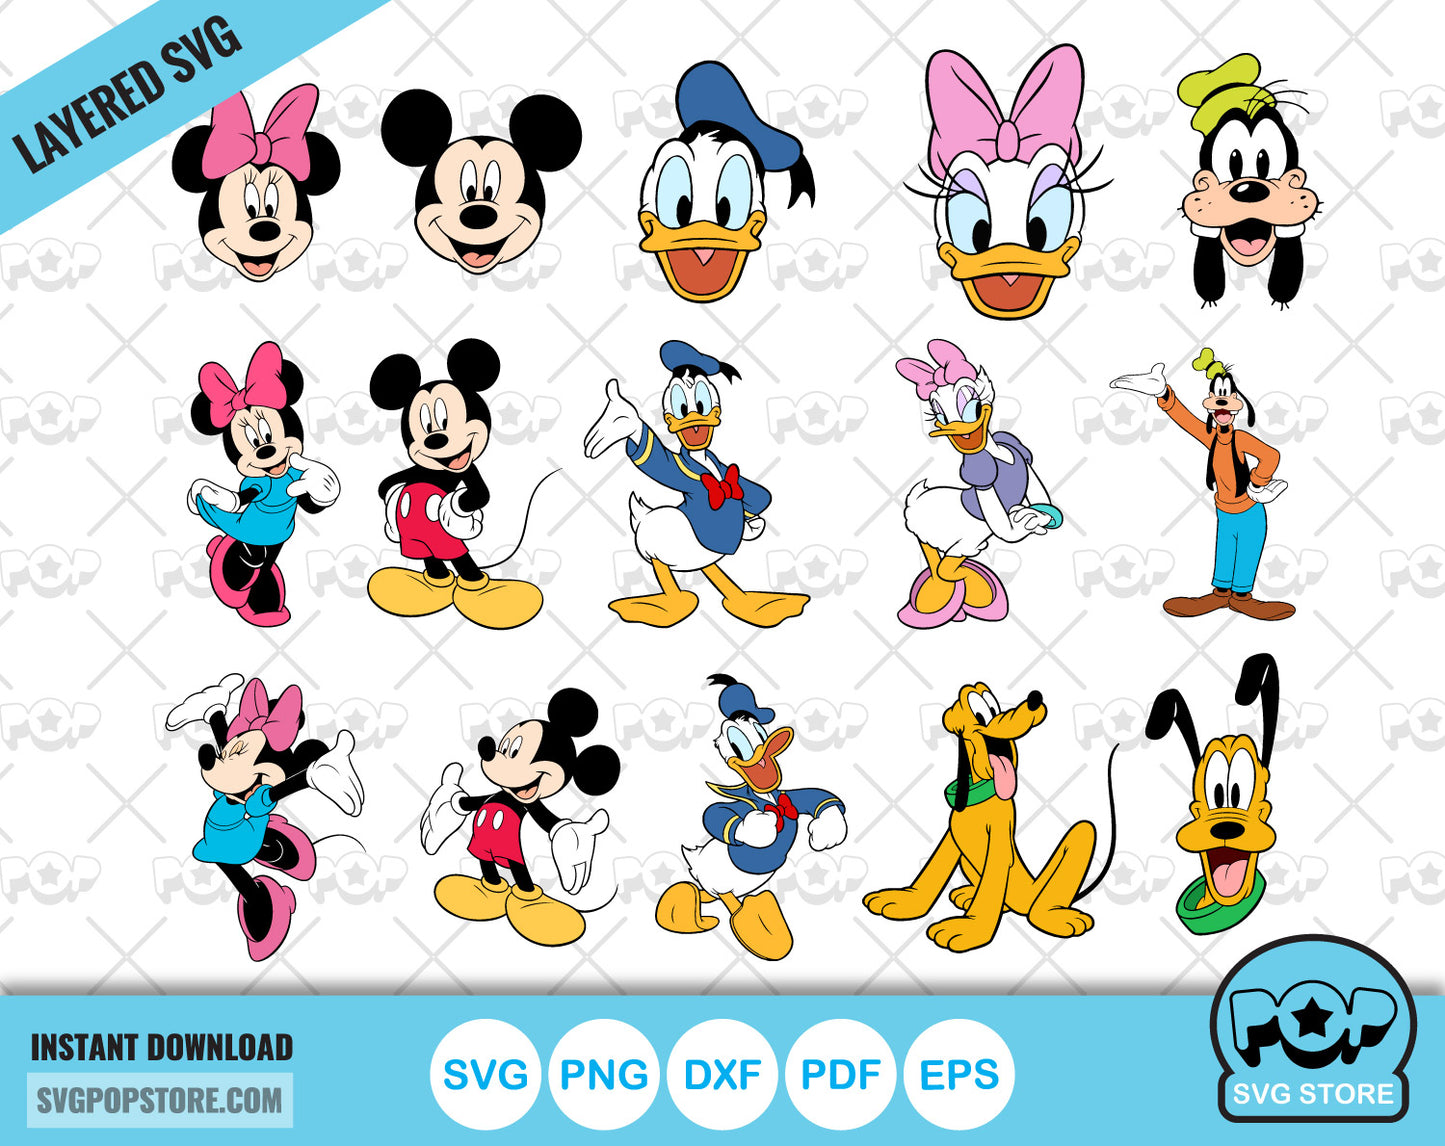 Mickey and Friends clipart bundle, SVG cutting files for cricut silhouette, SVG, PNG, DXF, instant download